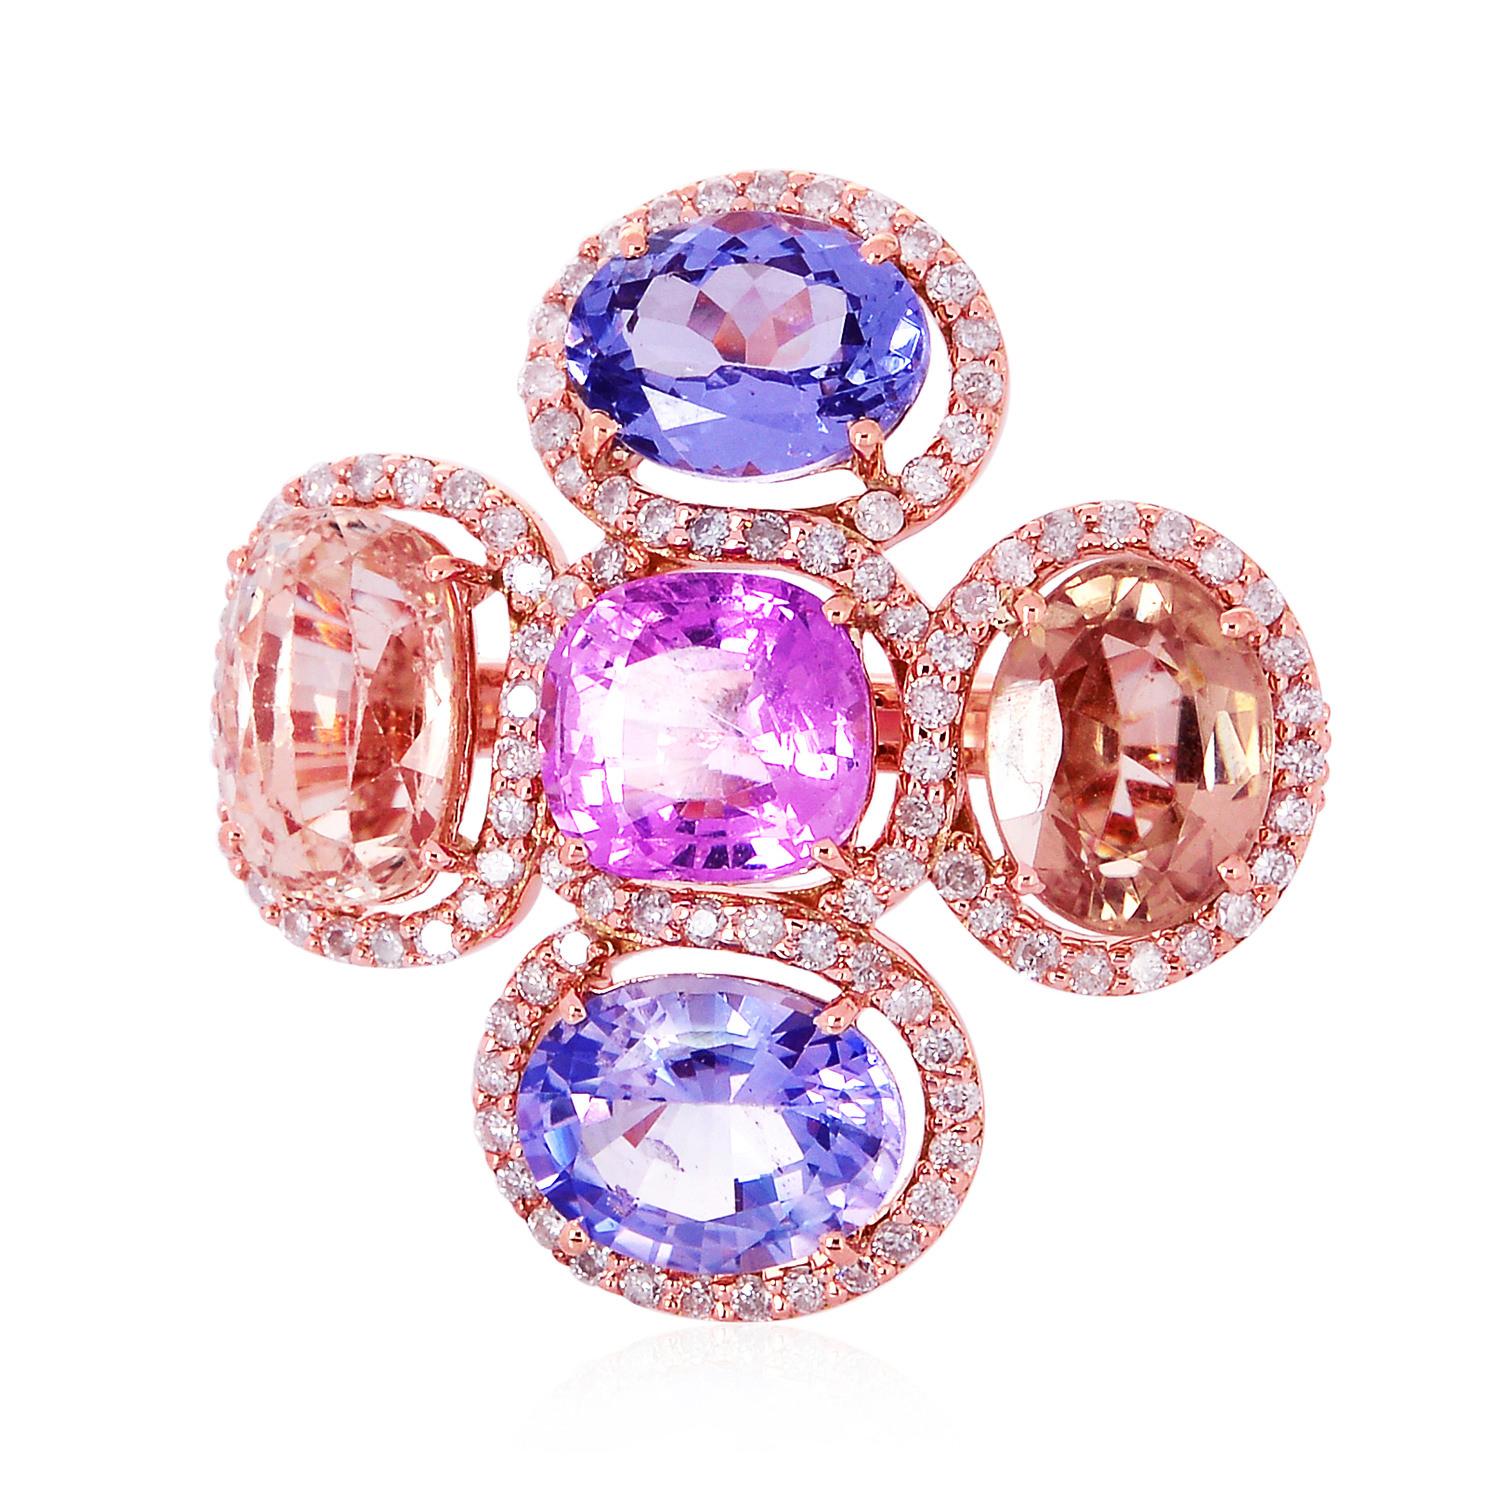 Oval Shaped Multi-Color Sapphire Ring in 18k Rose Gold Surrounded by Diamonds In New Condition For Sale In New York, NY